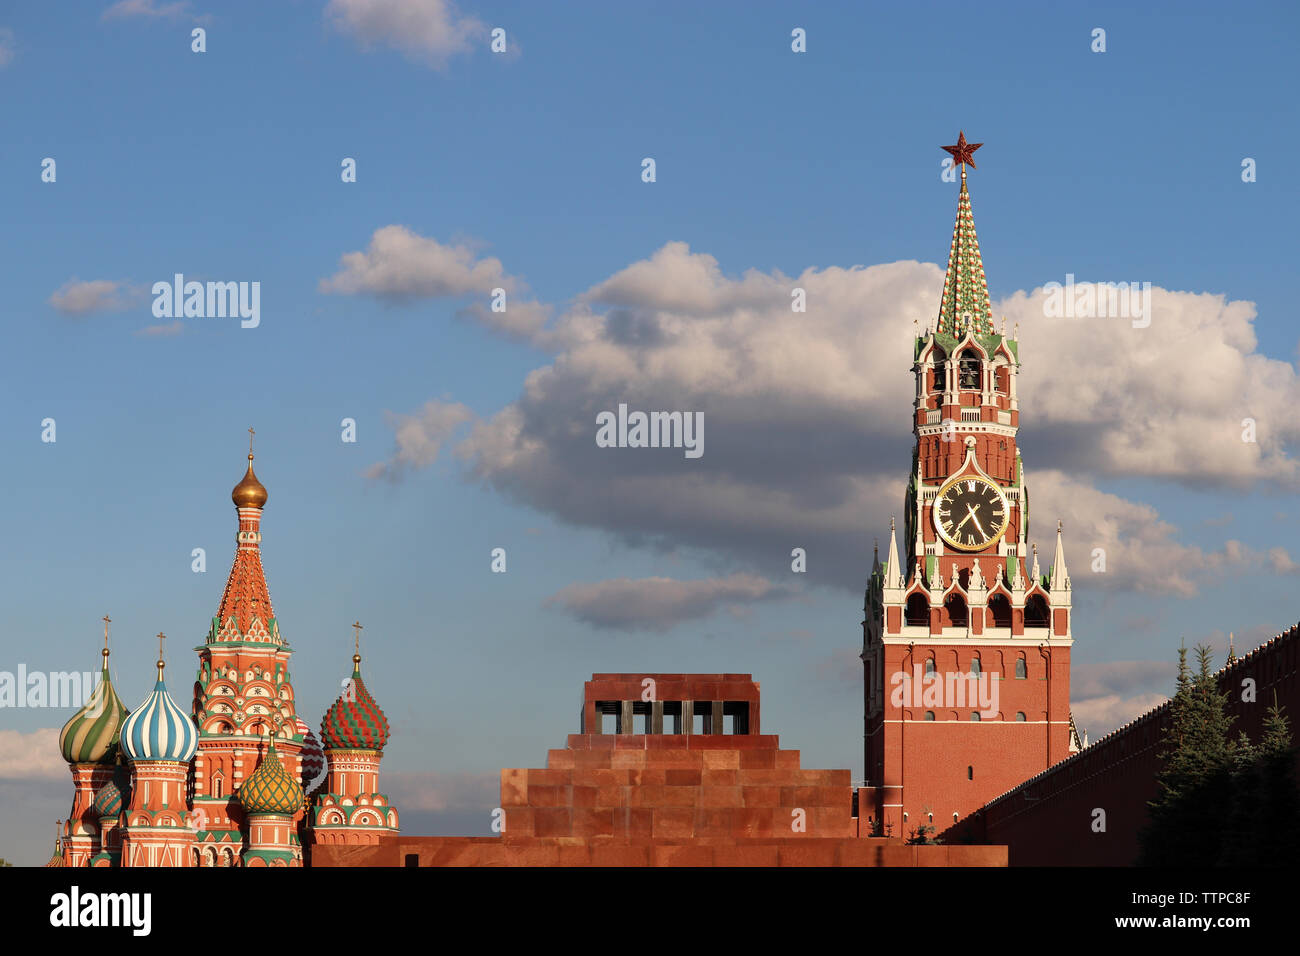 View to the Kremlin, St. Basil's Cathedral and Lenin mausoleum on Red Square in Moscow. Spasskaya tower against the blue sky with clouds Stock Photo